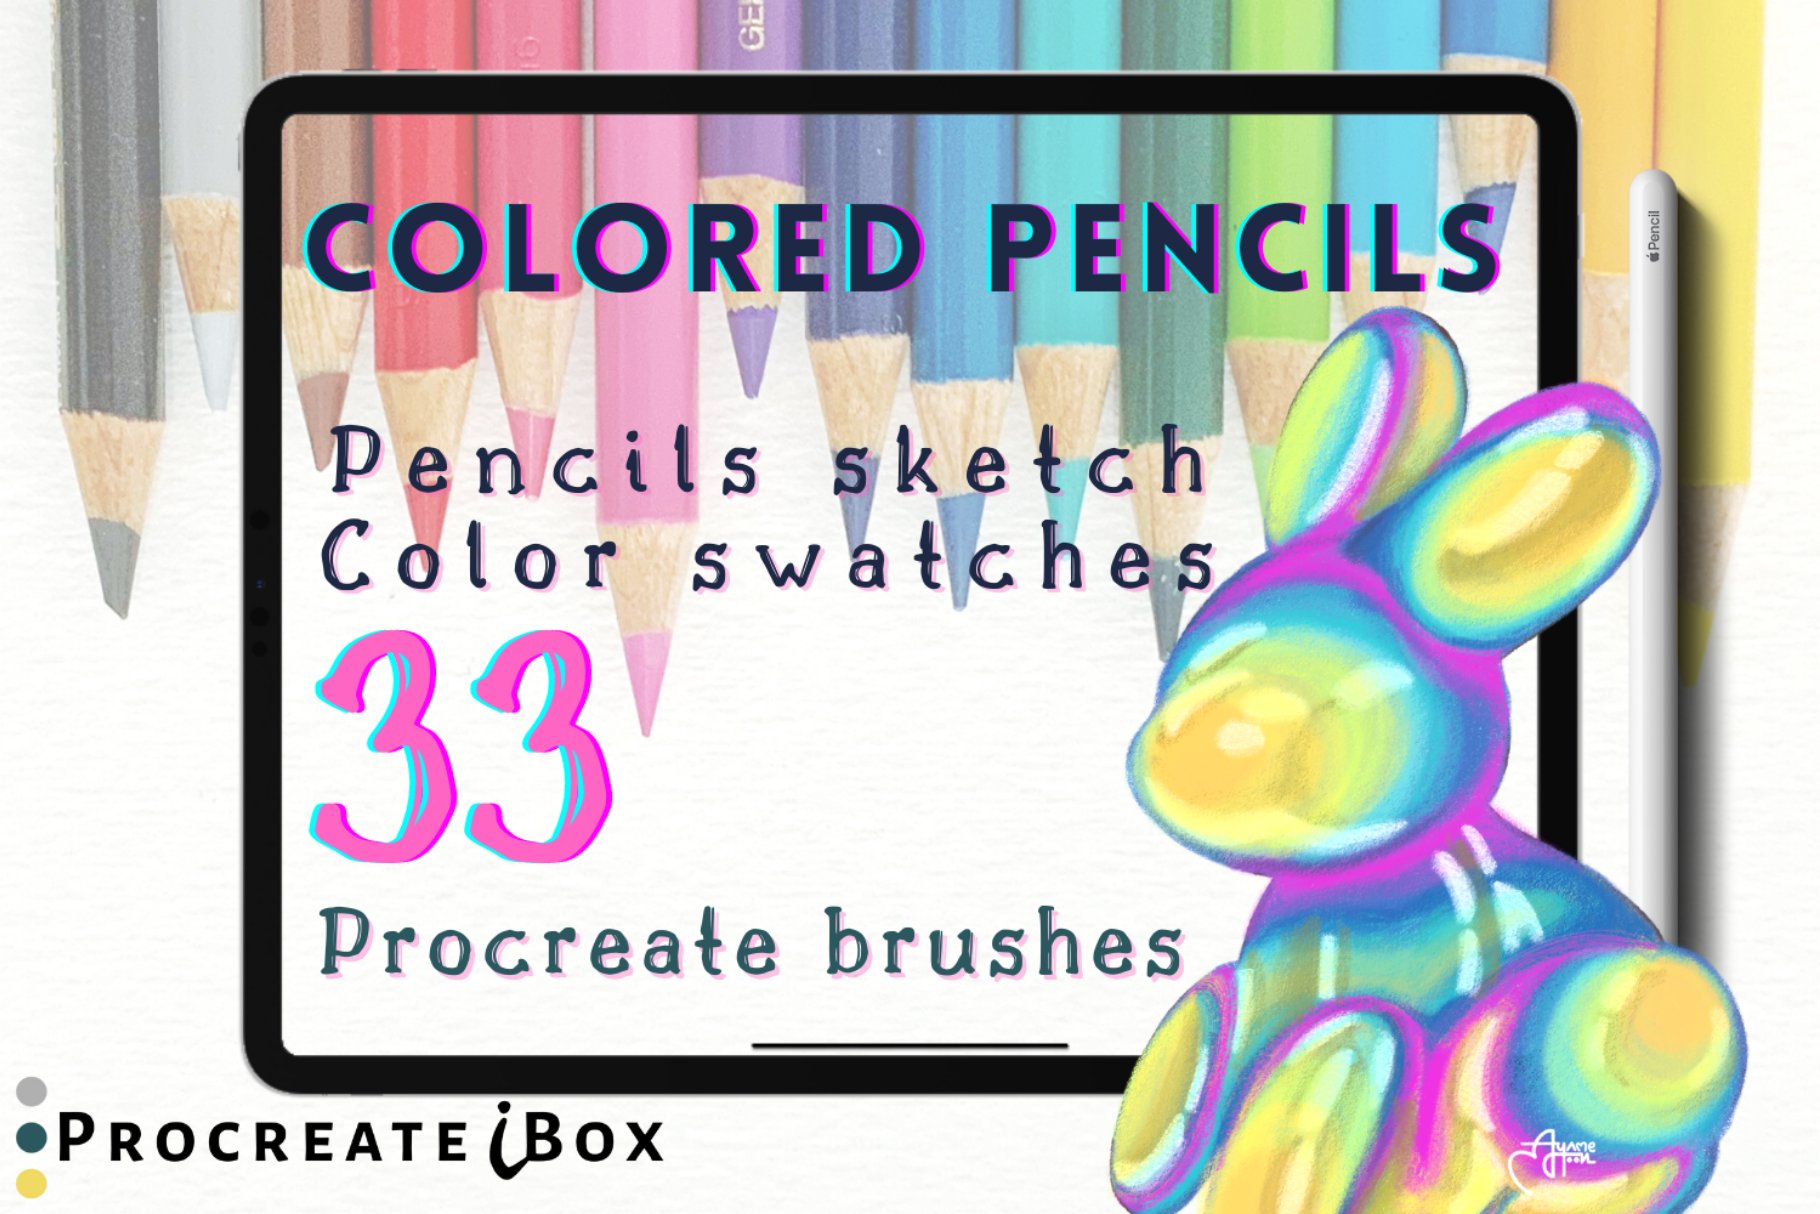 33 Colored pencils procreate brushes cover image.